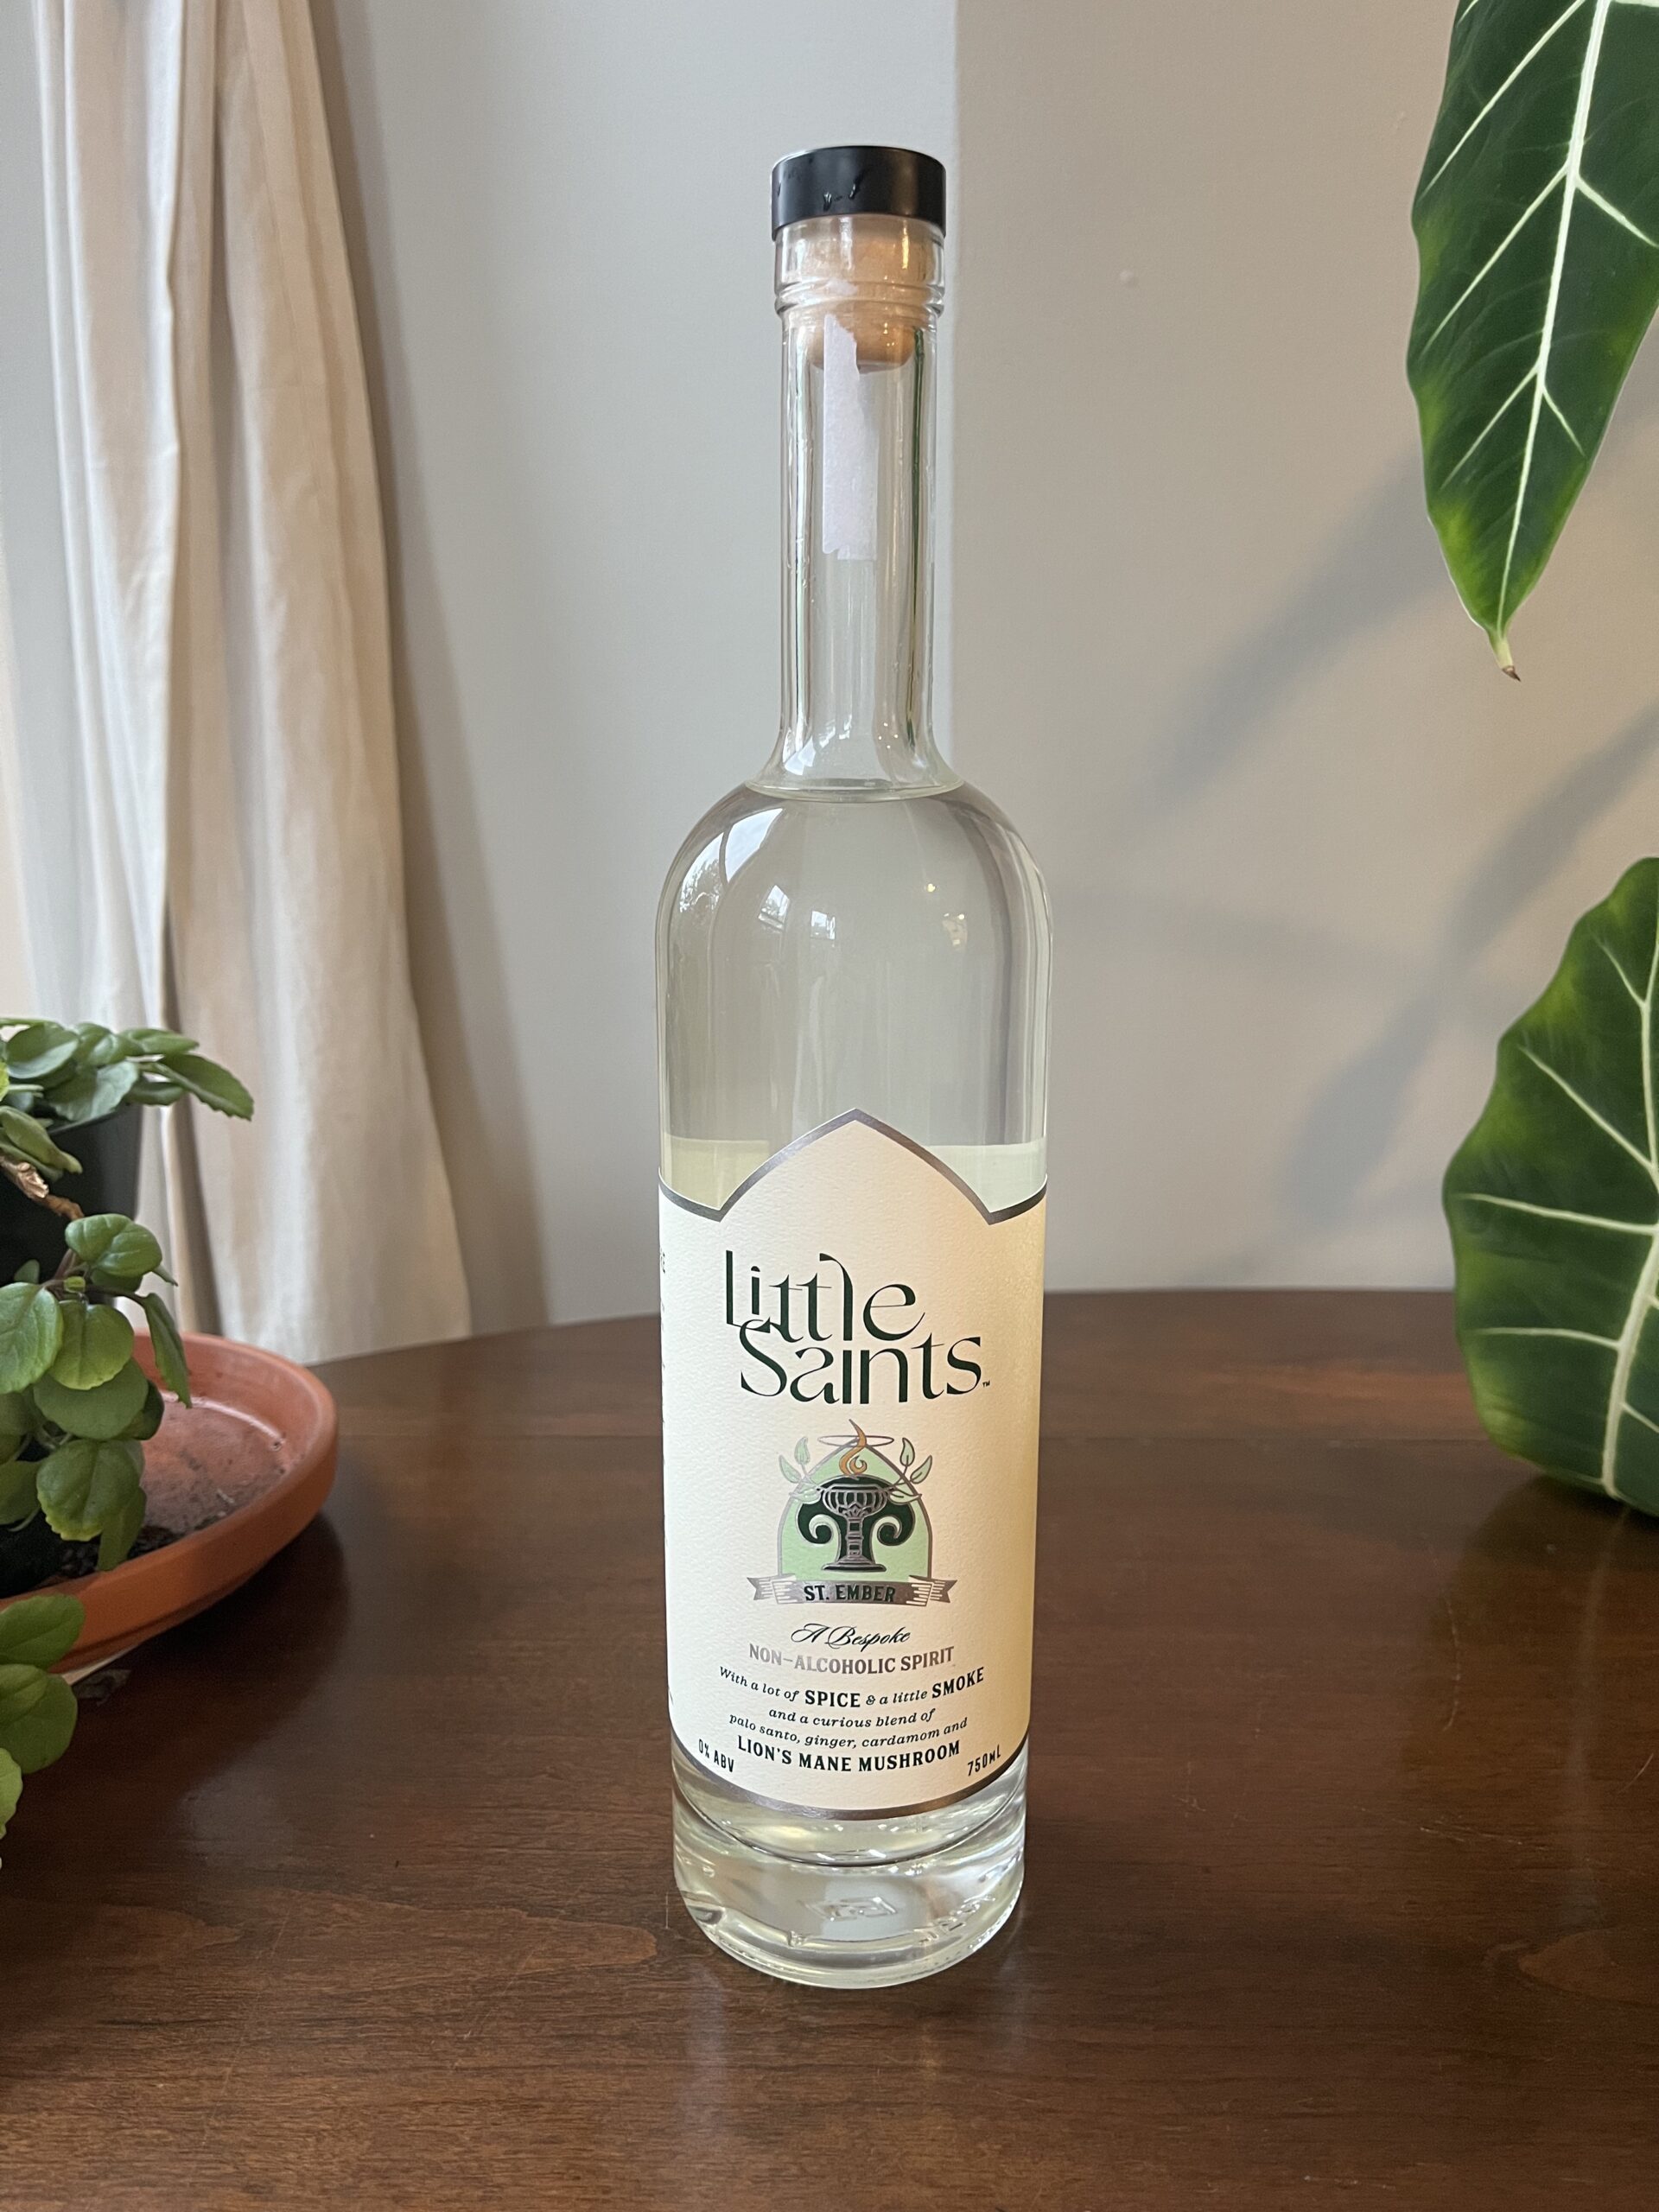 A clear glass bottle of Little Saints non-alcoholic spirit with adaptogens, placed on a wooden surface next to green potted plants.